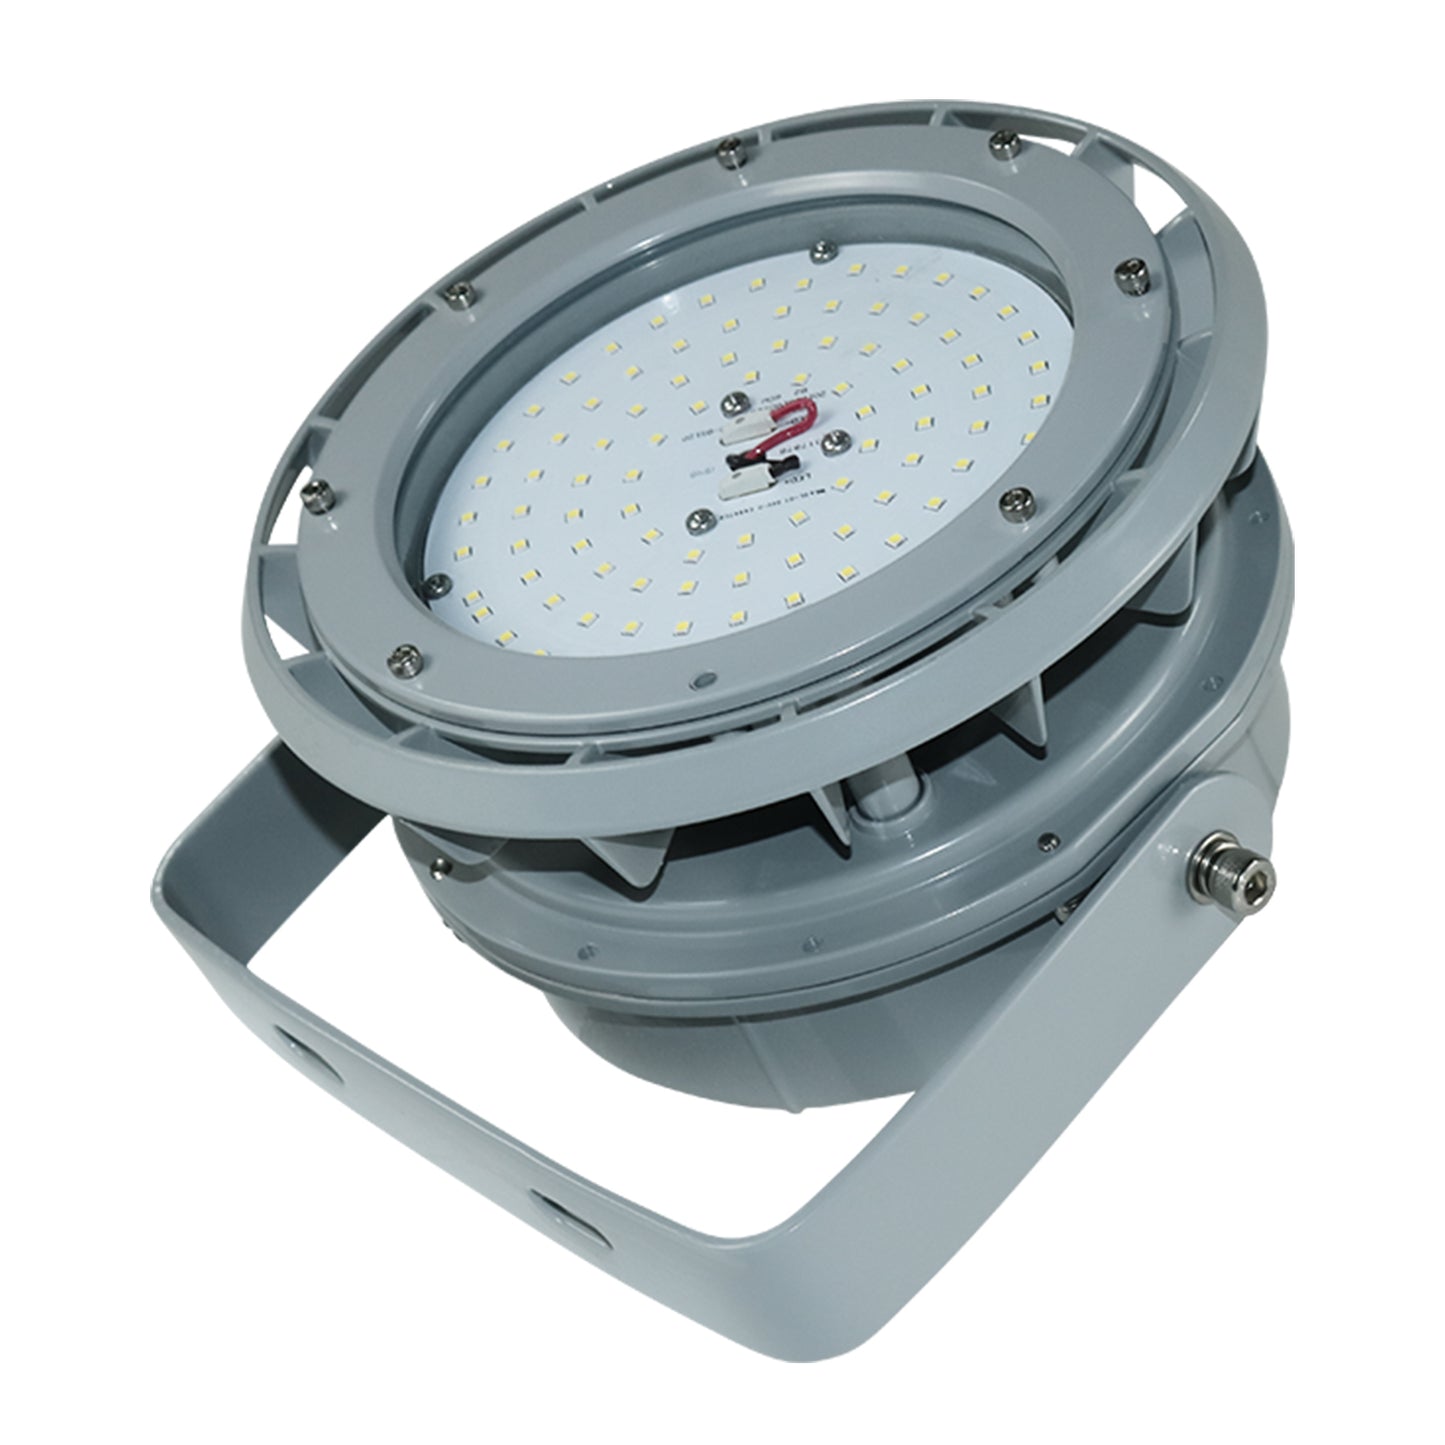 300 Watt LED Explosion Proof Round High Bay Light, B Series, Dimmable, 5000K, 42000LM, AC100-277V, IP66, Ideal for Oil & Gas Refineries, Drilling Rigs, Petrochemical Facilities